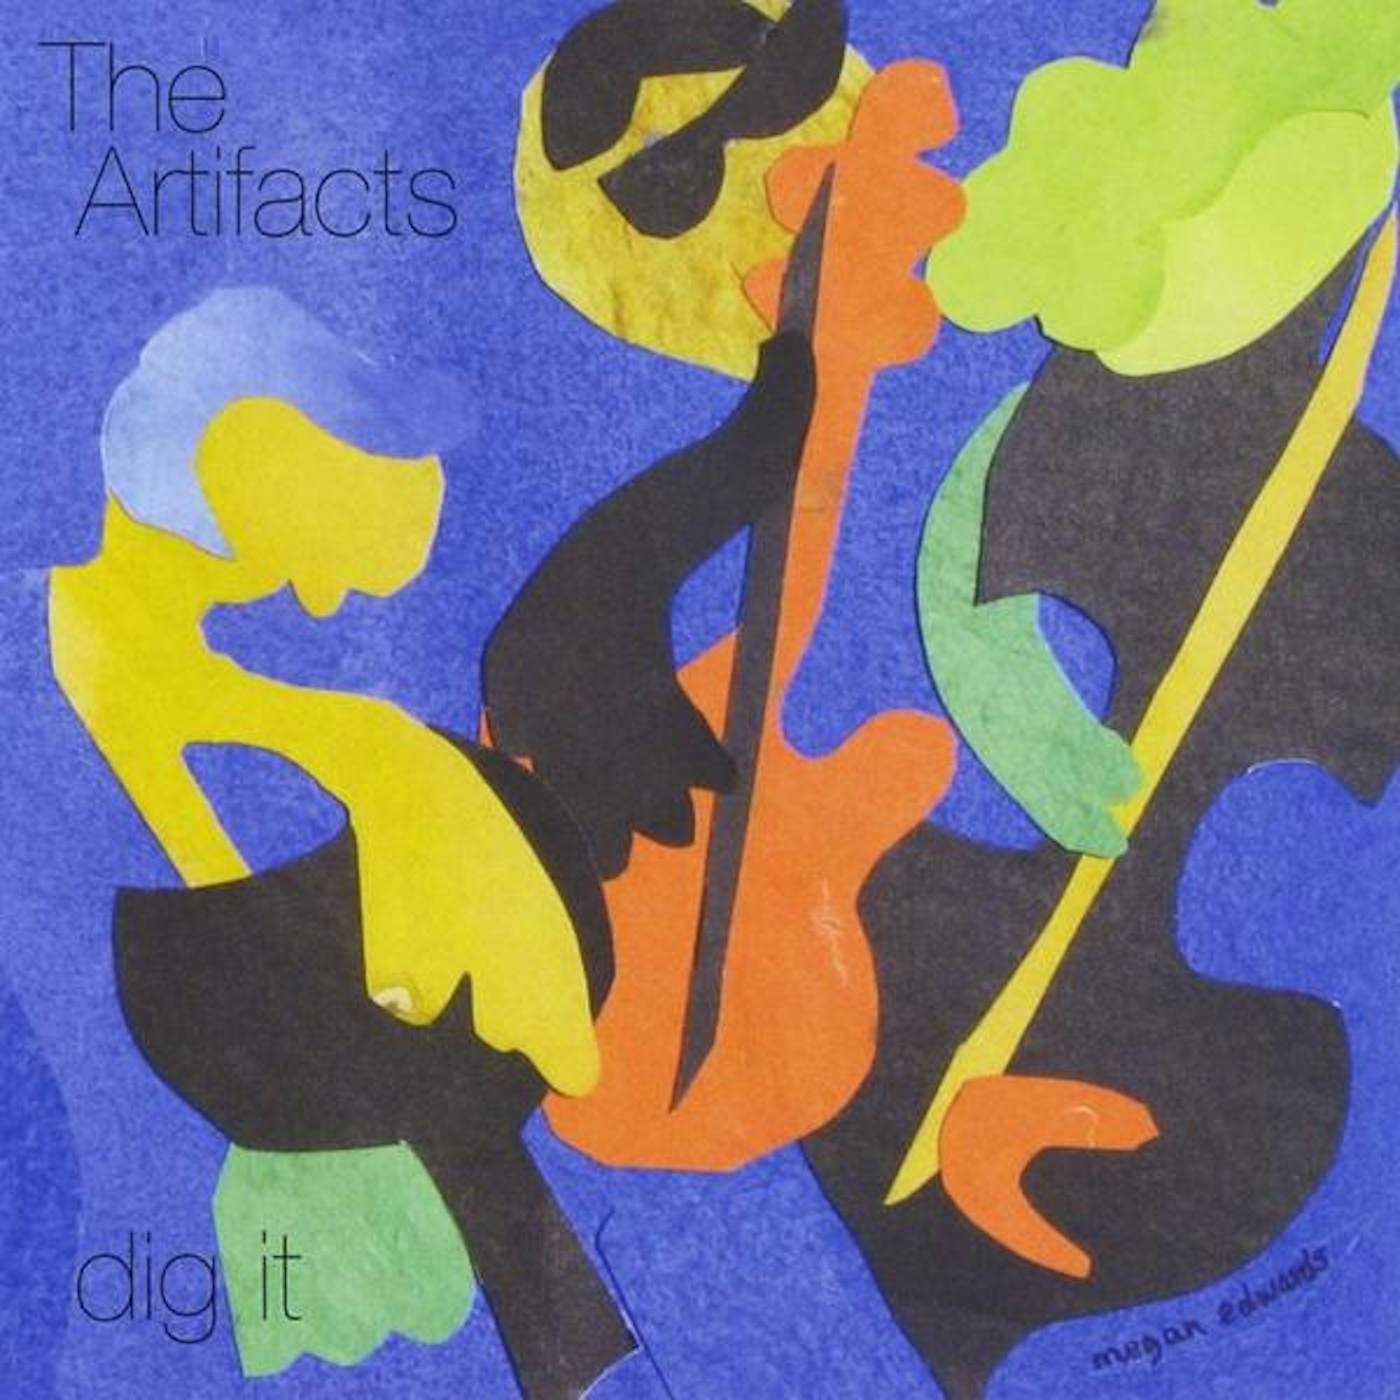 Artifacts DIG IT CD